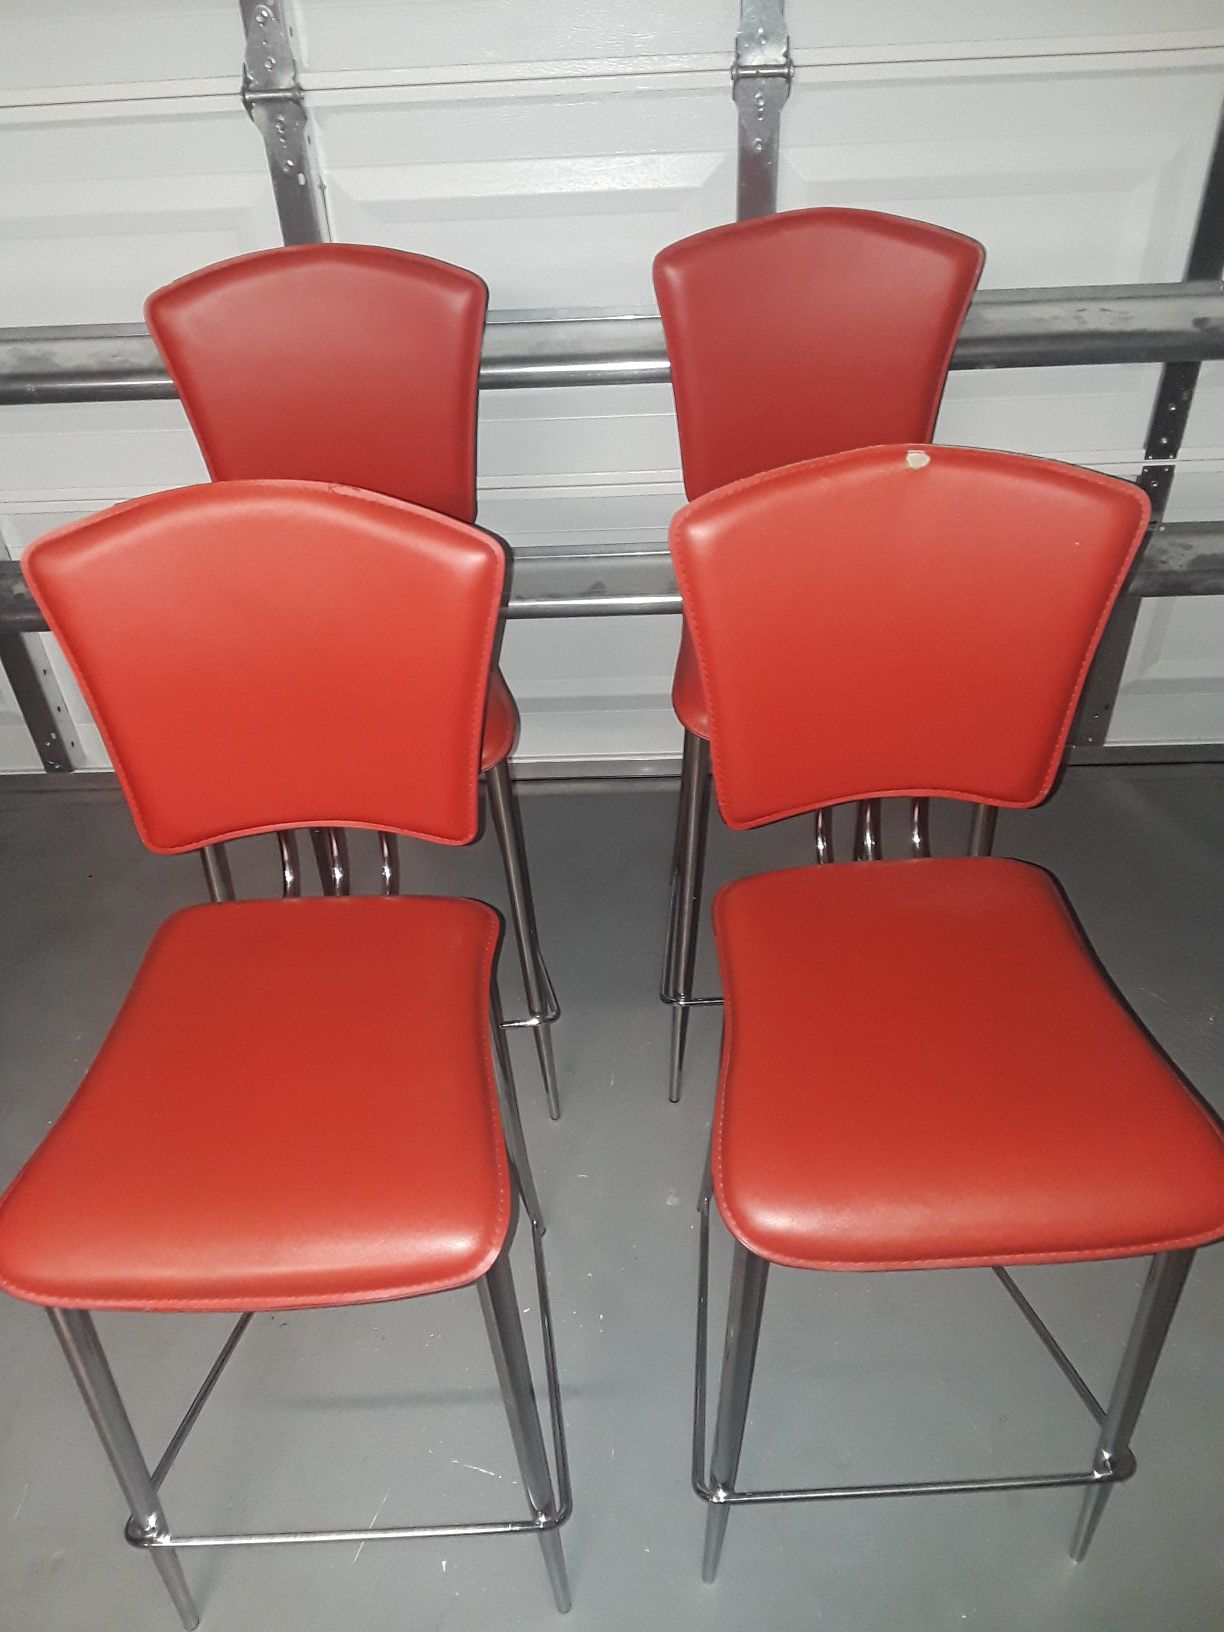 Counter Height Dining Chairs, Kitchen Chairs